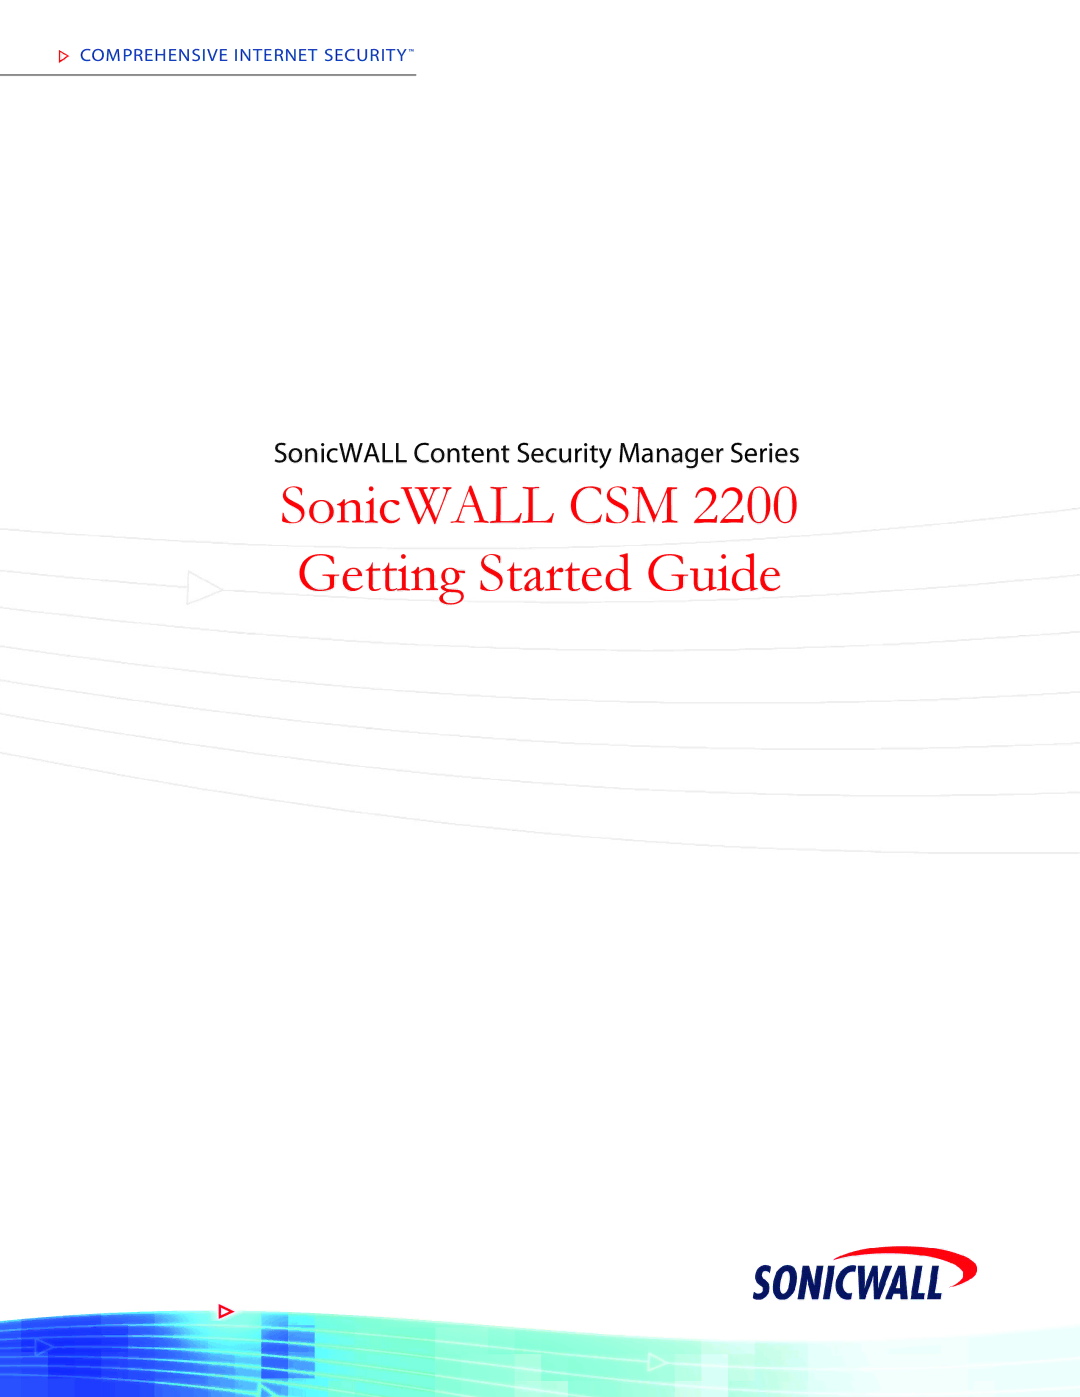 SonicWALL 2200 manual SonicWALL CSM Getting Started Guide 